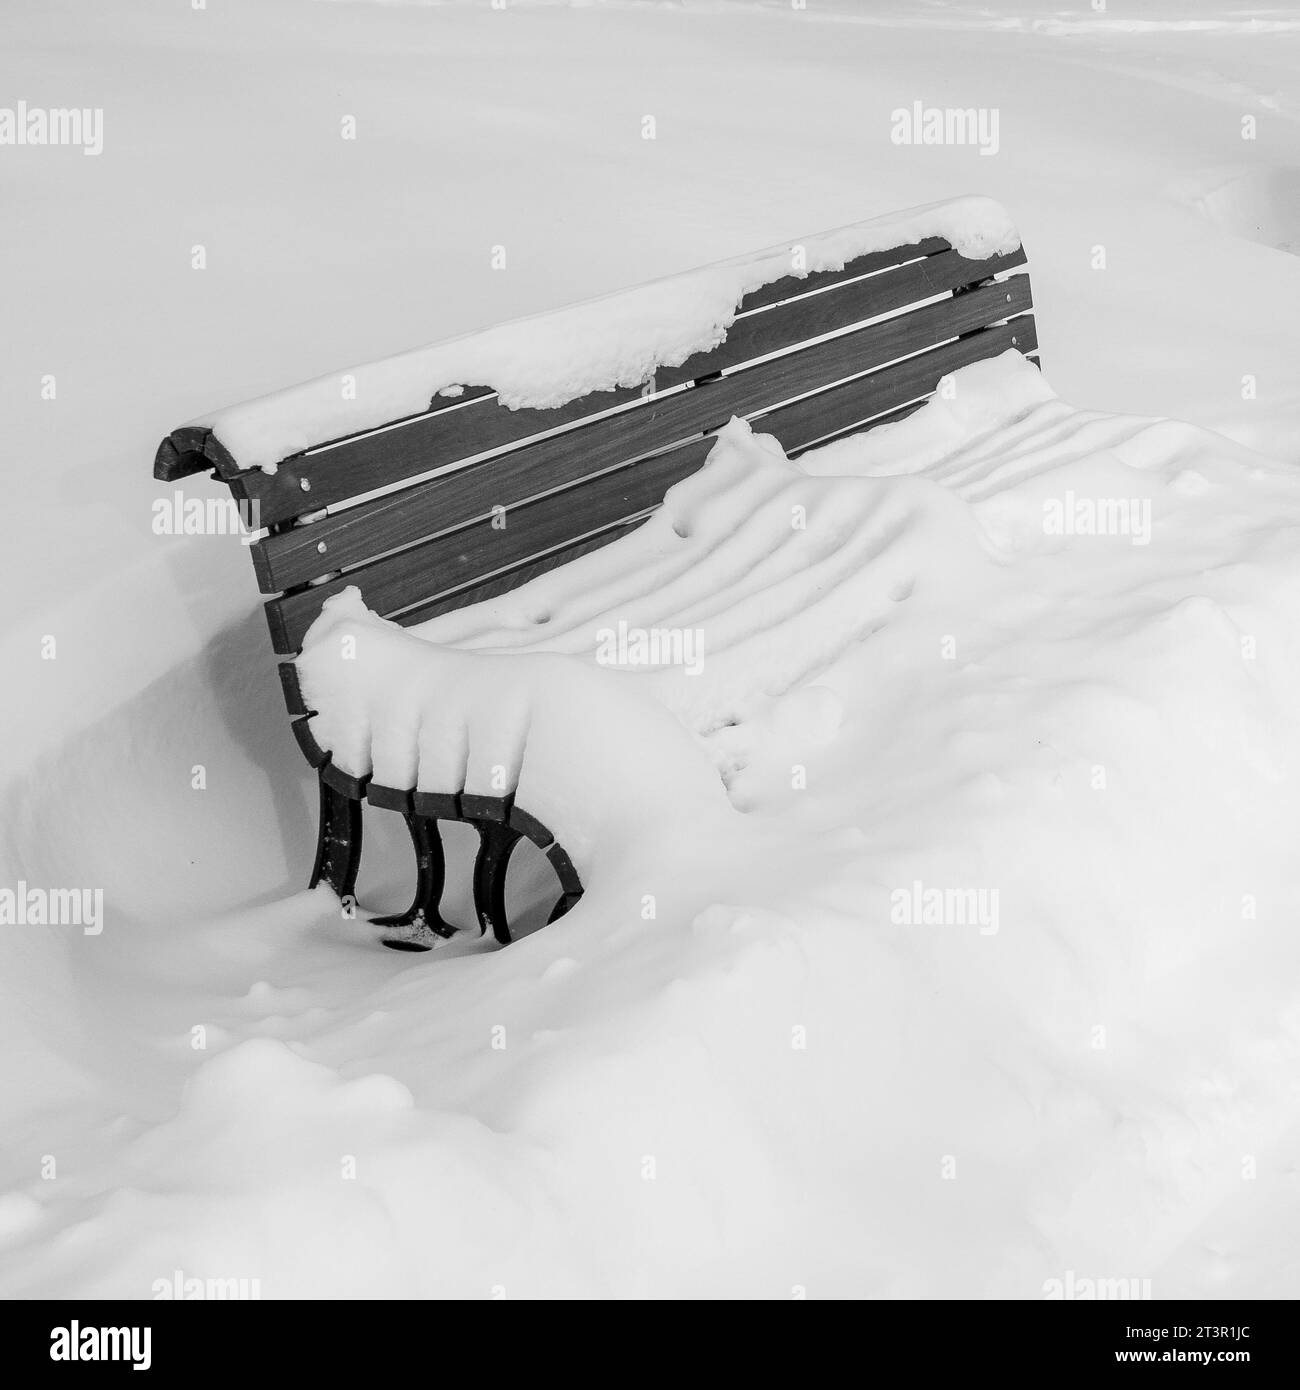 A bench under the snow, in LaFontaine Park, on the Mont-Royal plateau, in Montreal, province of Quebec, Canada. Stock Photo